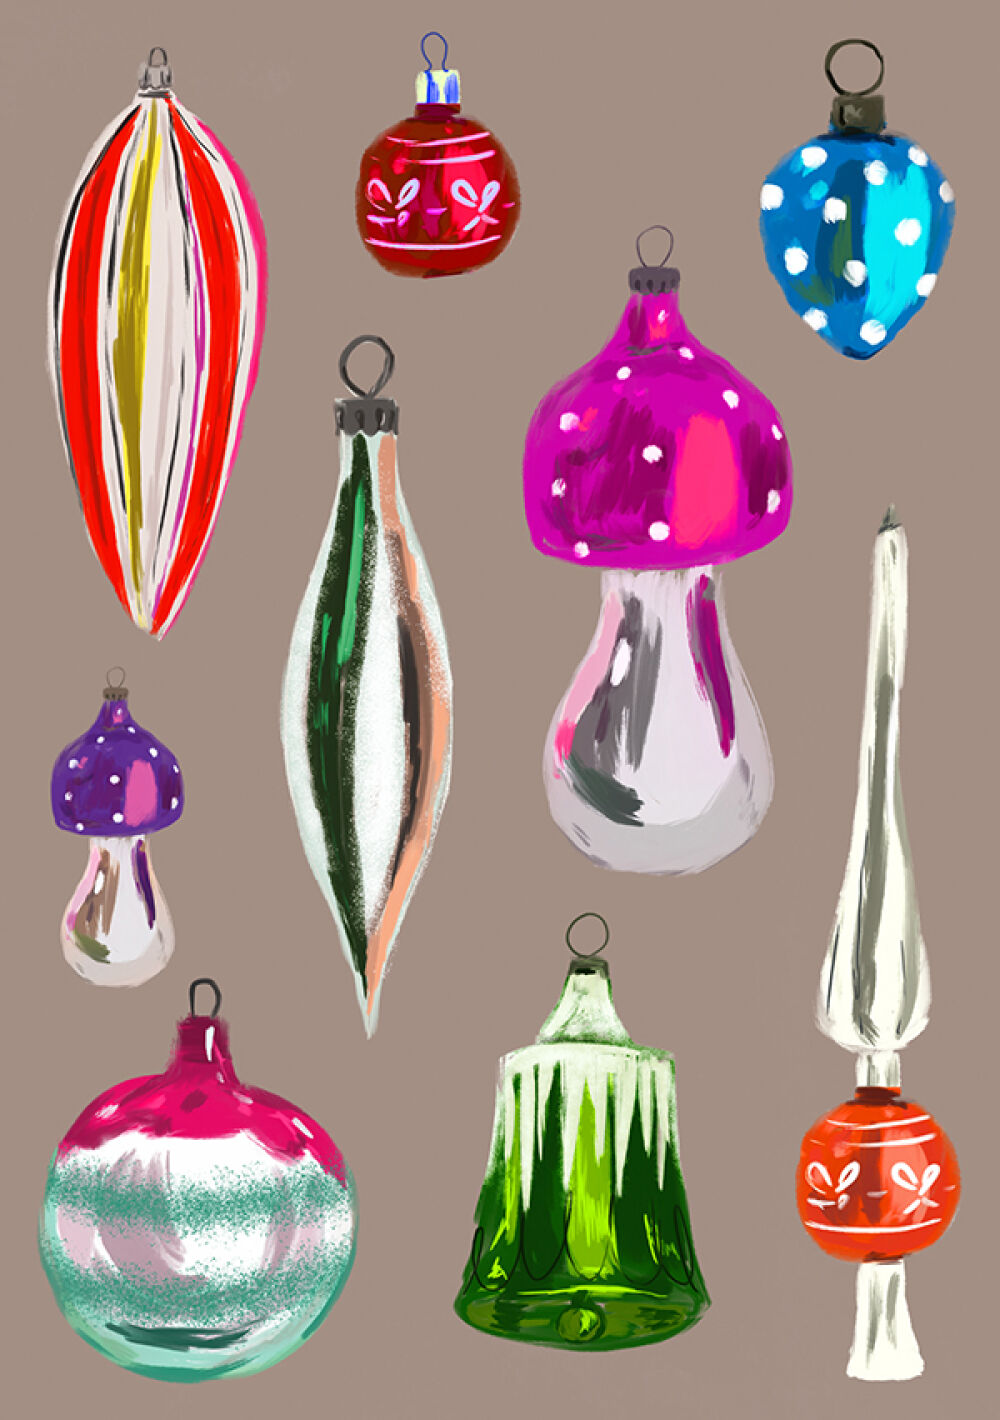 Christmas assets illustrated by the Canadian digital artist Christina Gliha